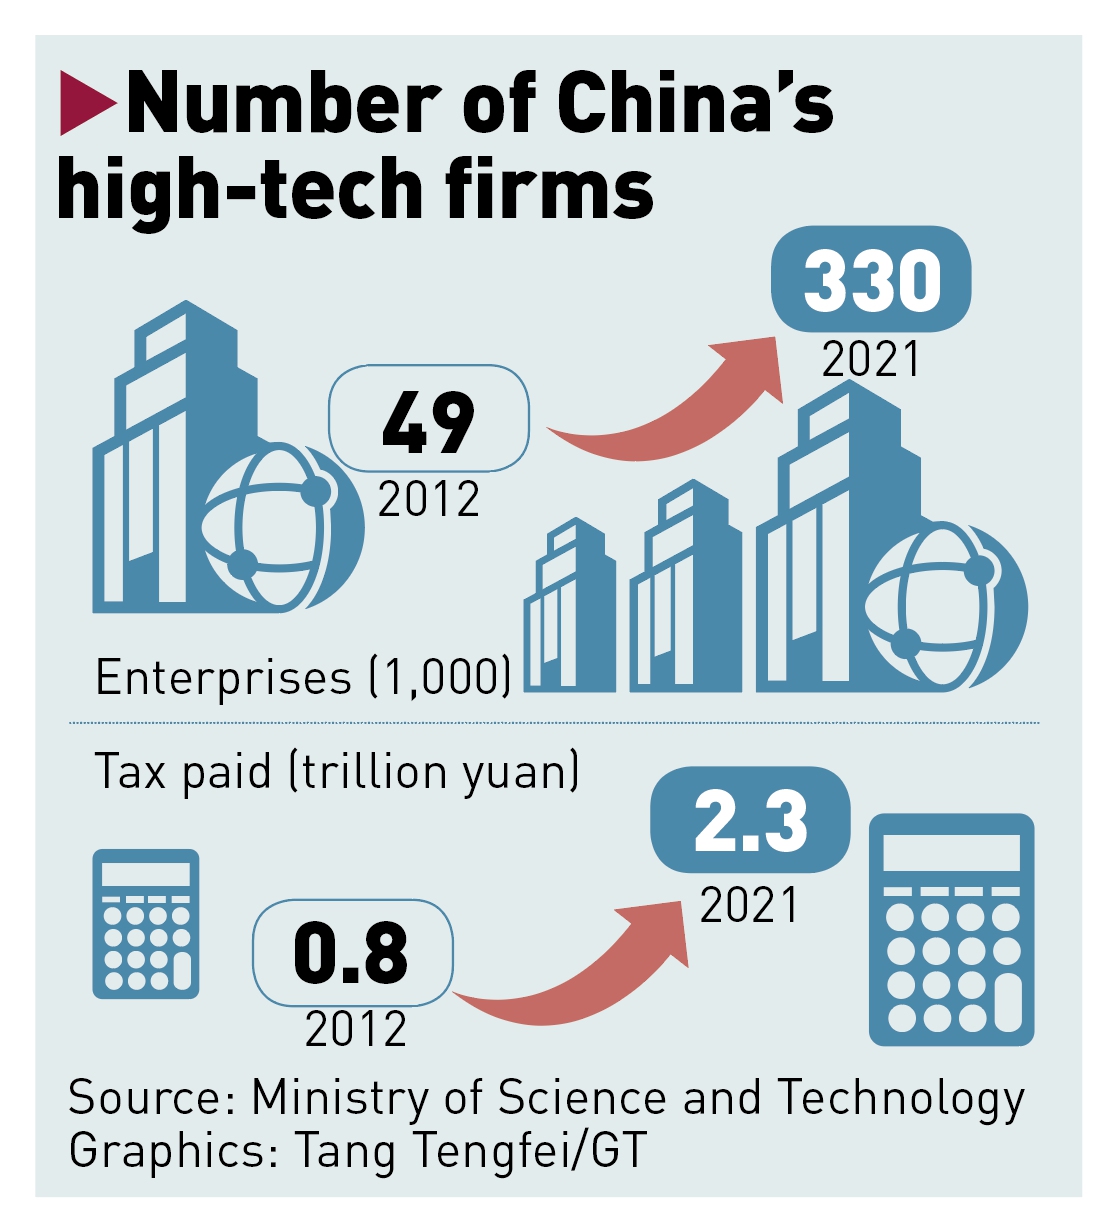 Number of China's high-tech firms 2012-2021 Graphic: GT